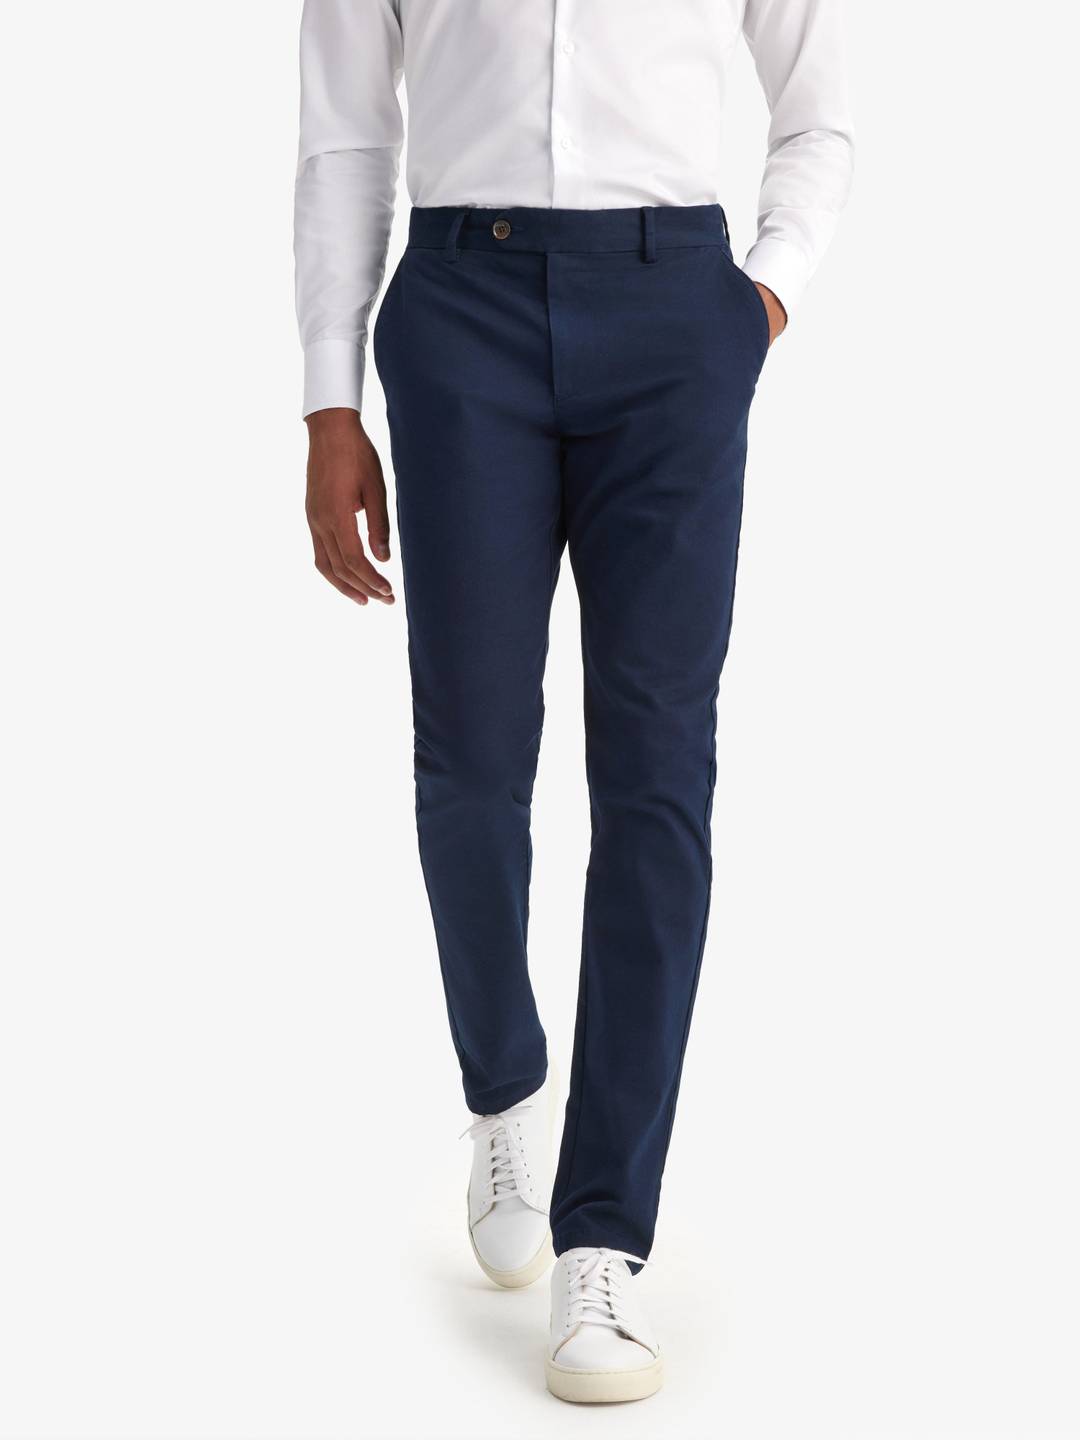 Buy Navy Blue Trousers & Pants for Men by CLUB CHINO Online | Ajio.com